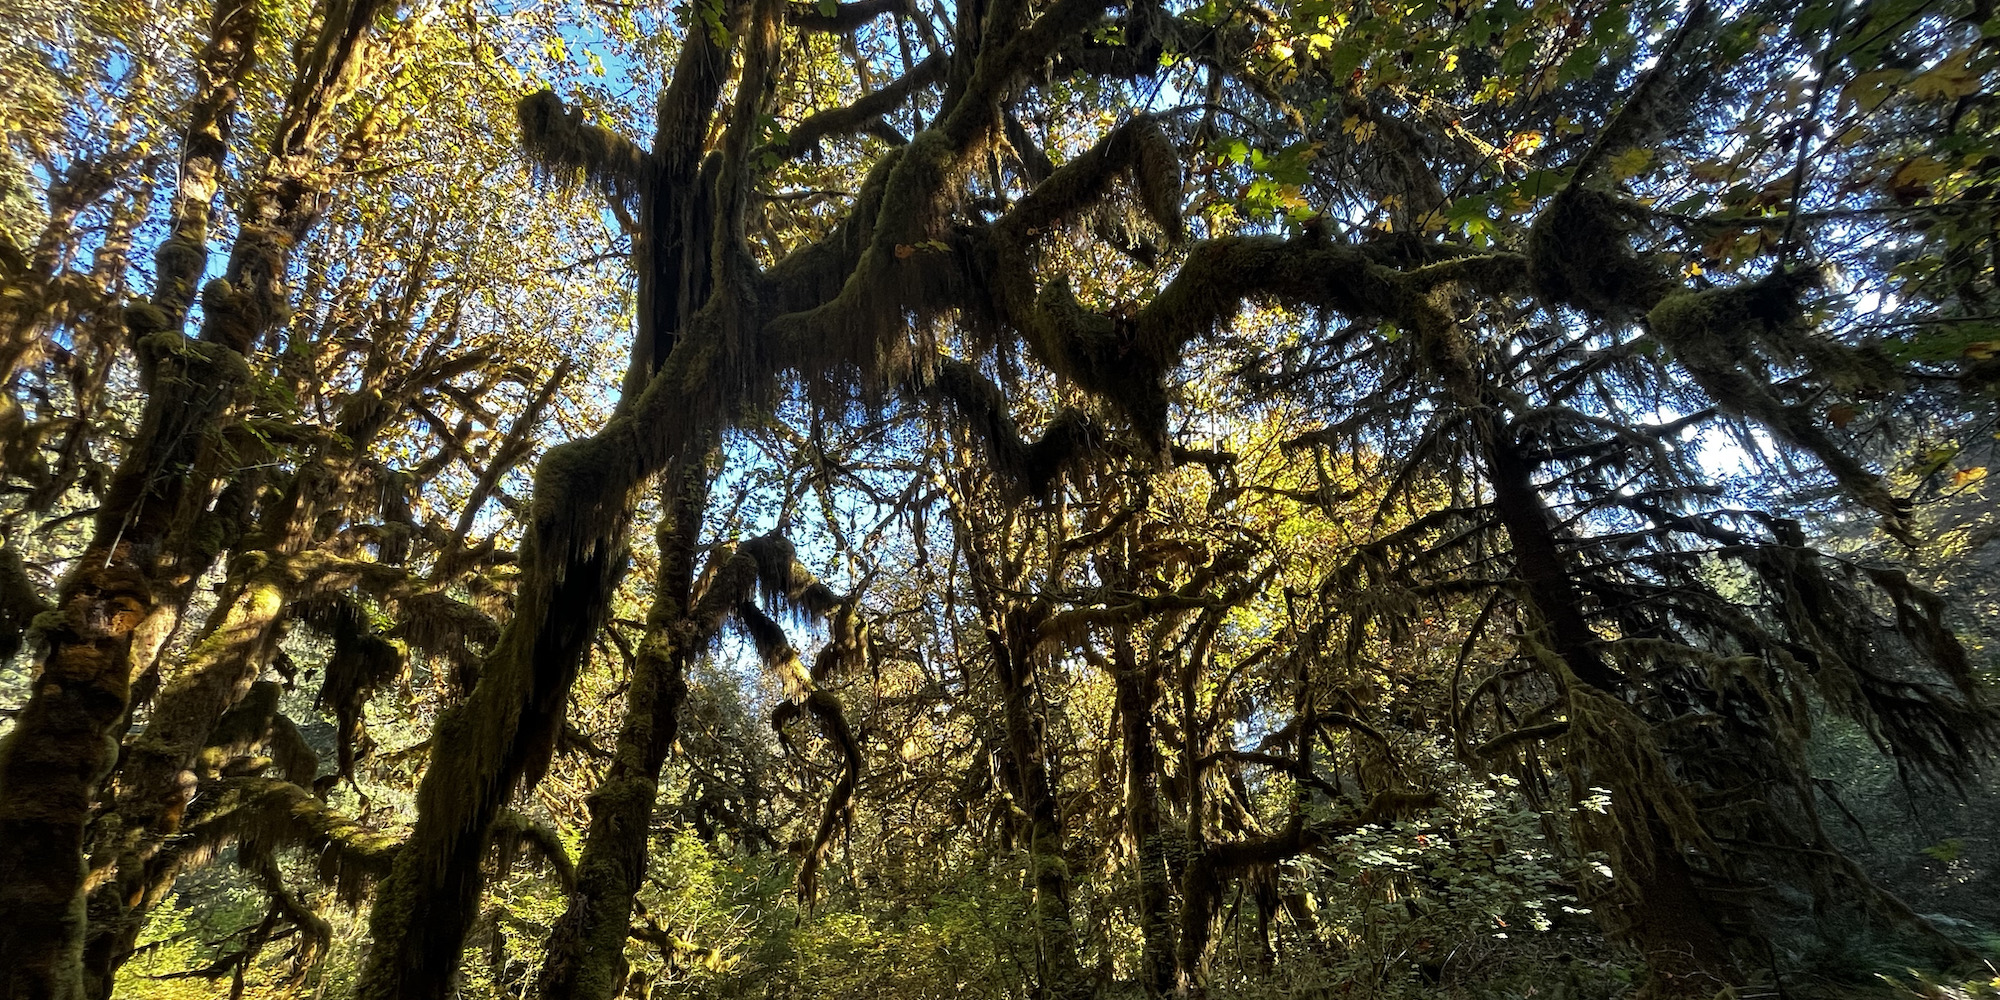 Trees and moss in the Hoh Rainforest basking in the sunshine